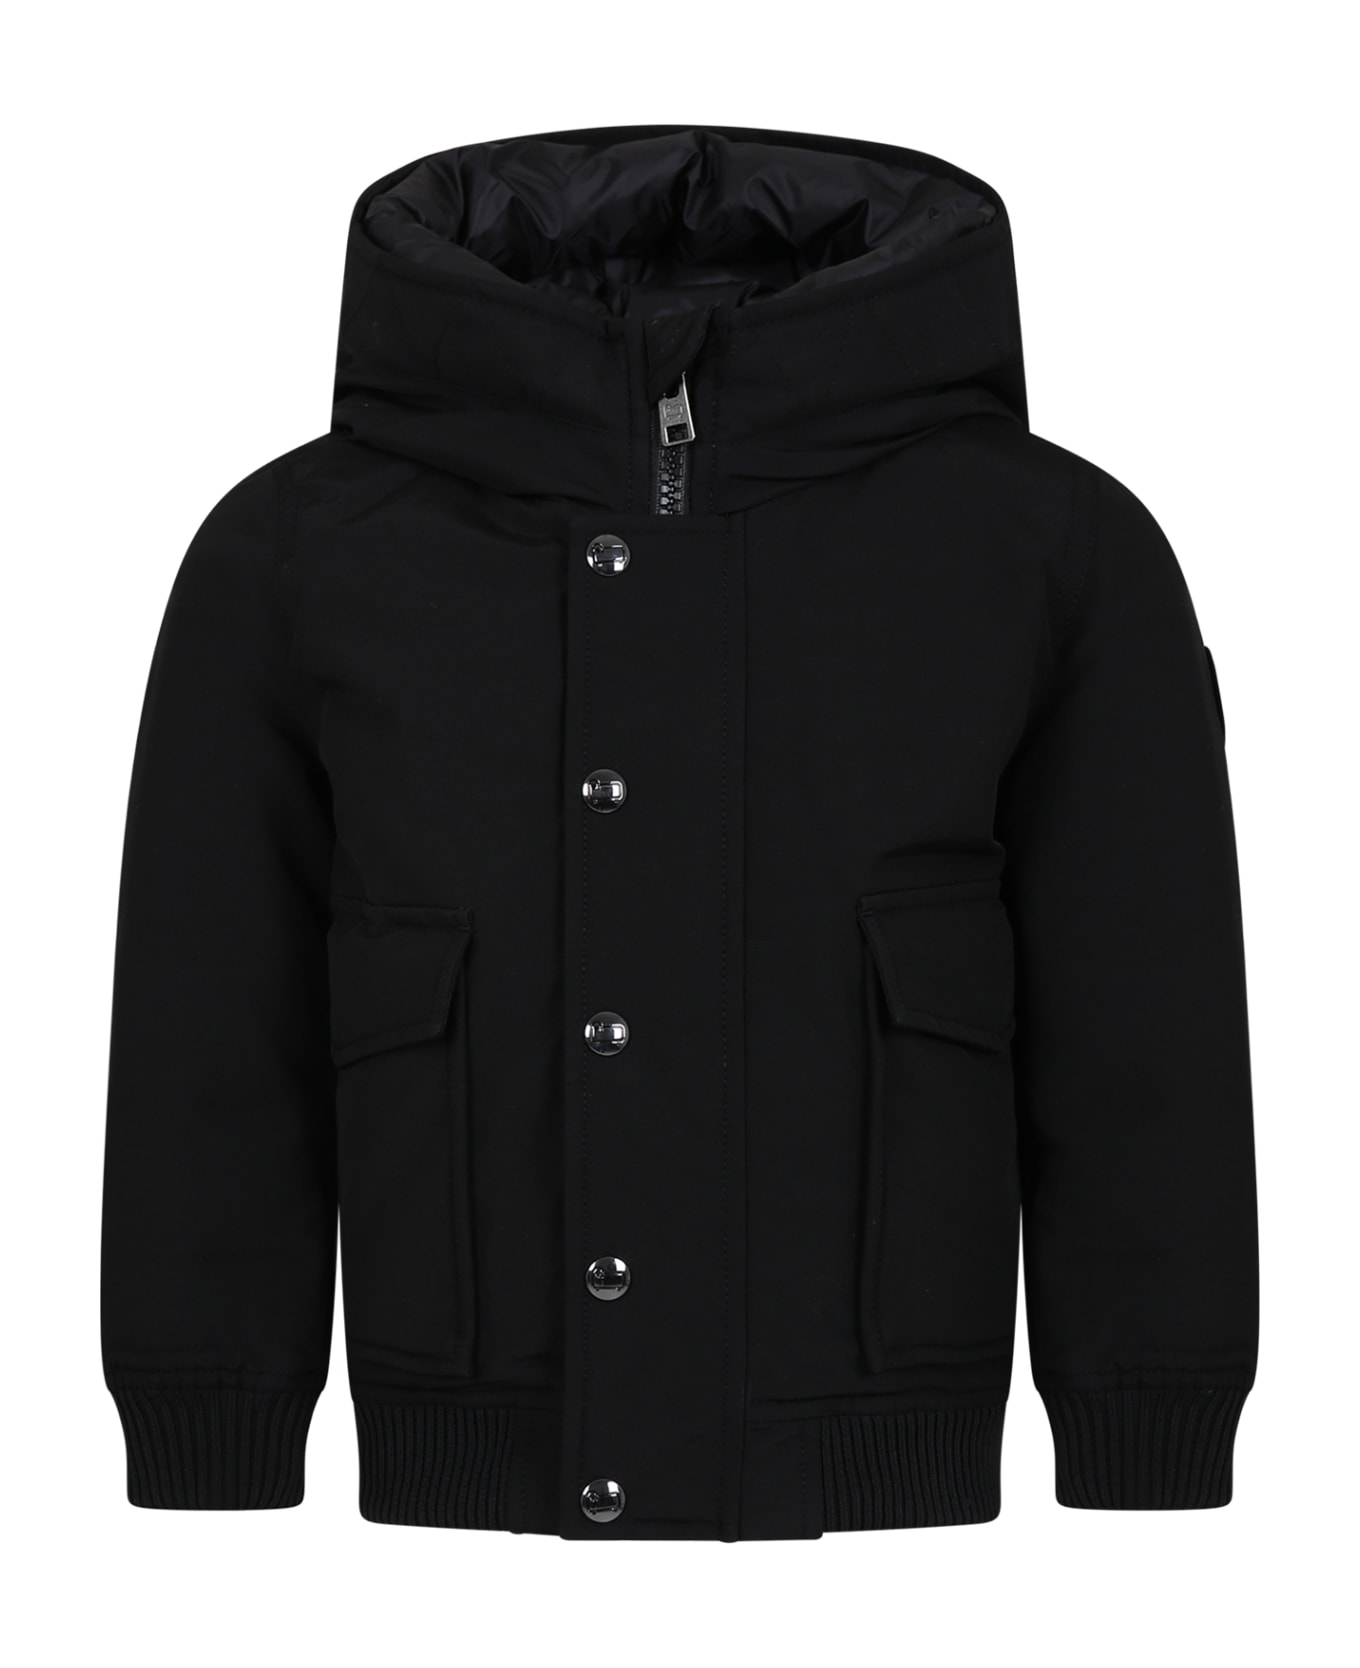 Woolrich Black Down Jacket For Boy With Logo - Black